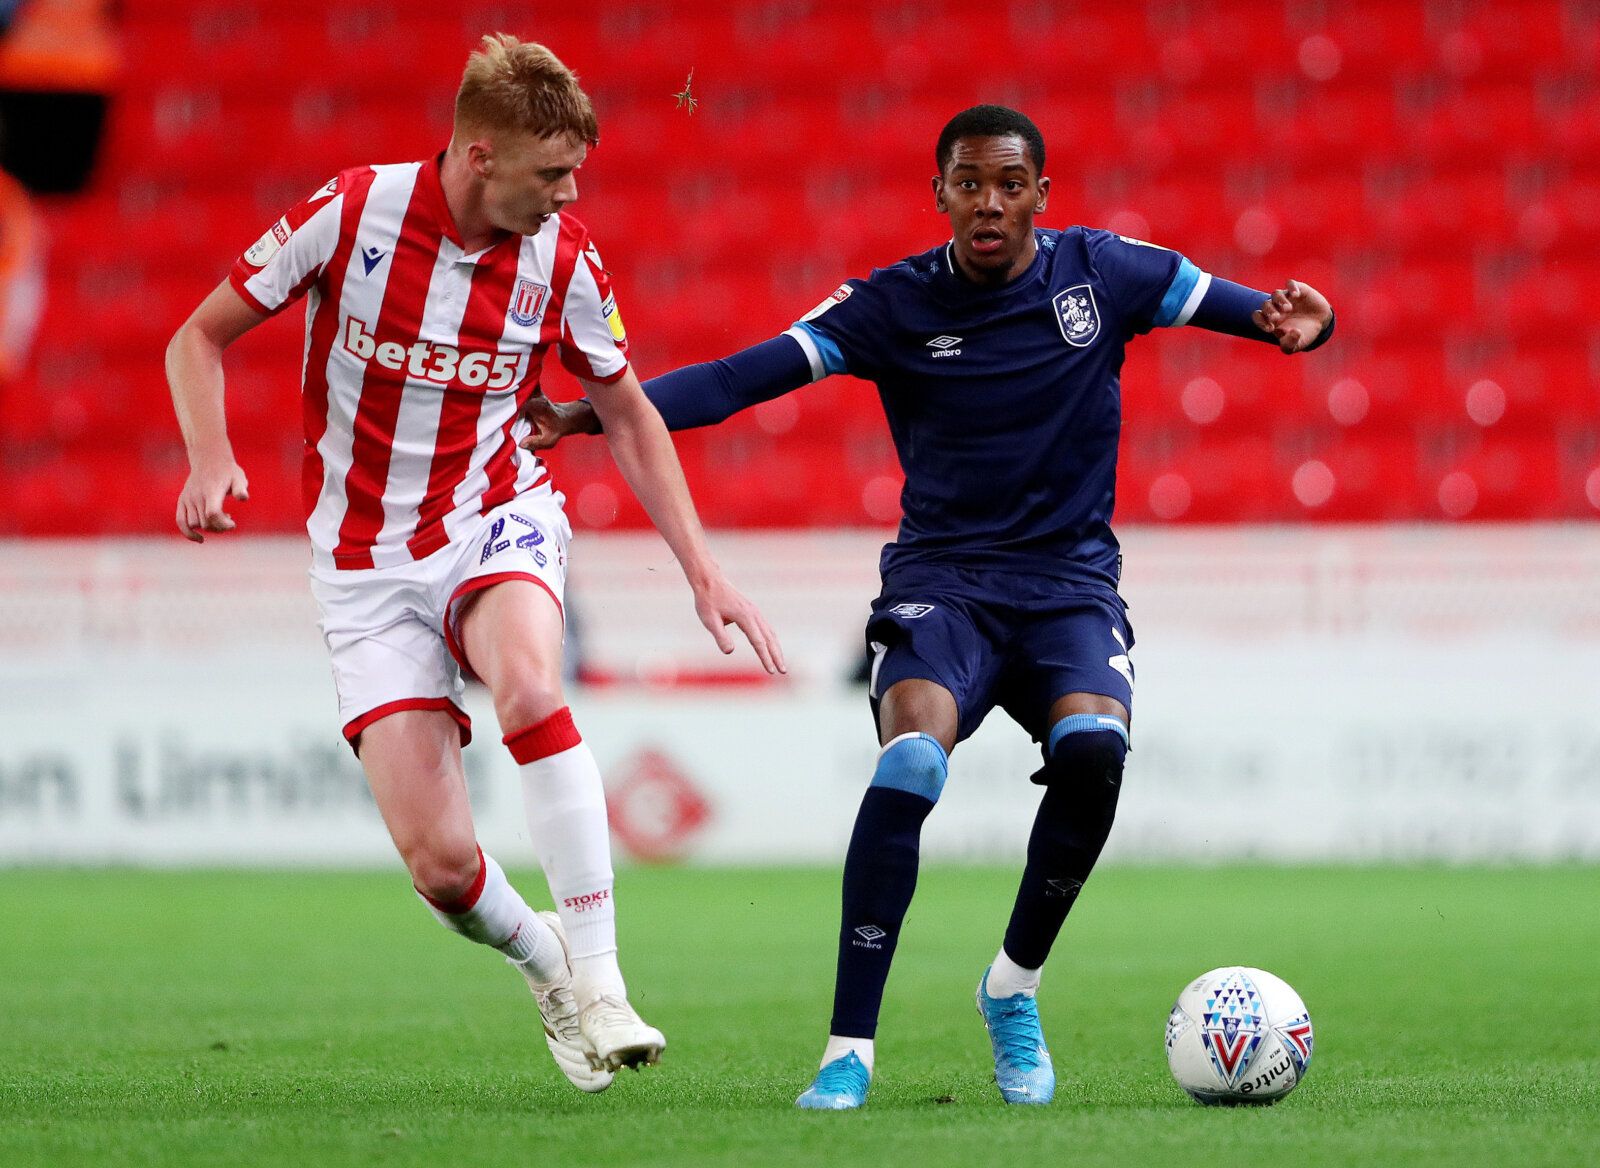 Soccer Football - Championship - Stoke City v Huddersfield Town - bet365 Stadium, Stoke-on-Trent, Britain - October 1, 2019   Stoke City's Sam Clucas in action with Huddersfield Town's Jaden Brown   Action Images/Molly Darlington    EDITORIAL USE ONLY. No use with unauthorized audio, video, data, fixture lists, club/league logos or 